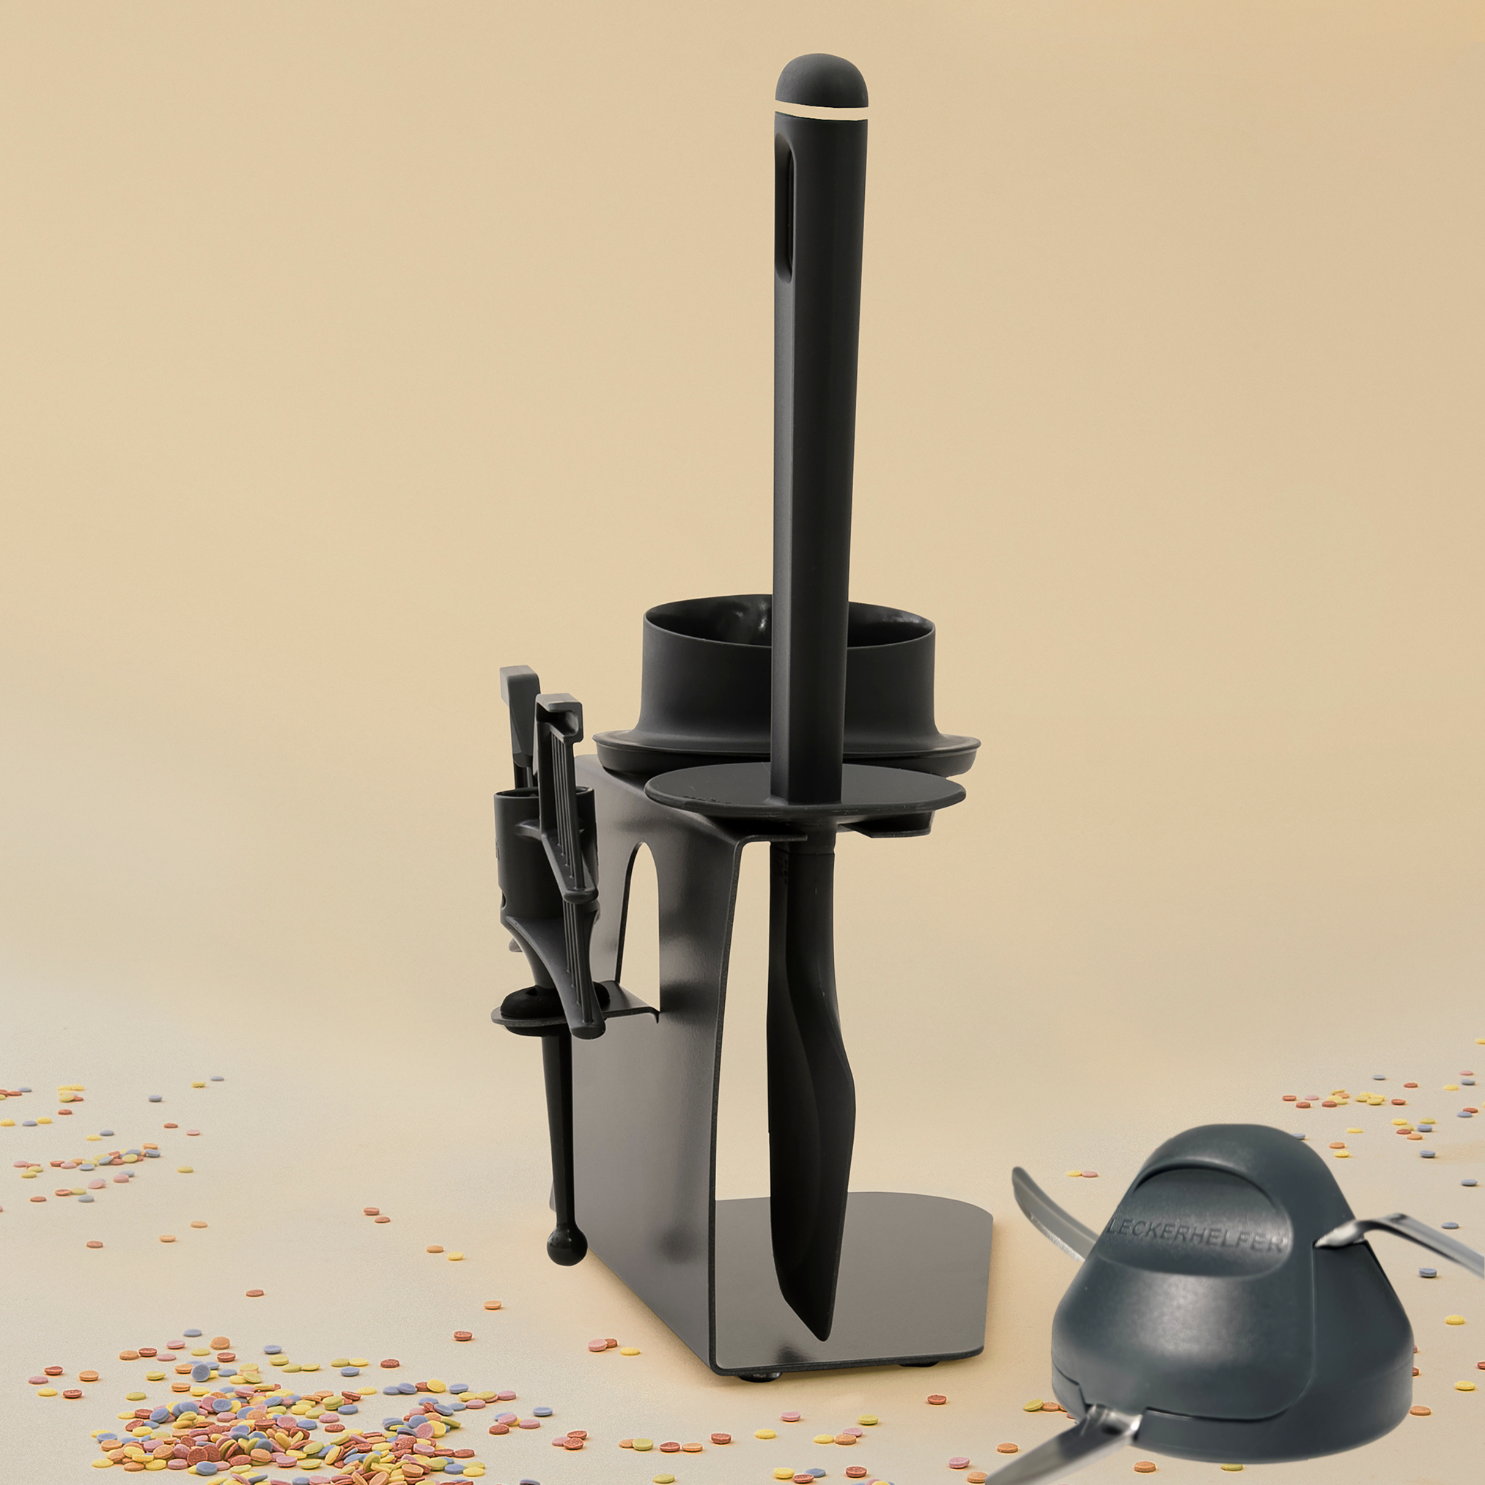 DoughPRO + accessory holder suitable for the TM6 